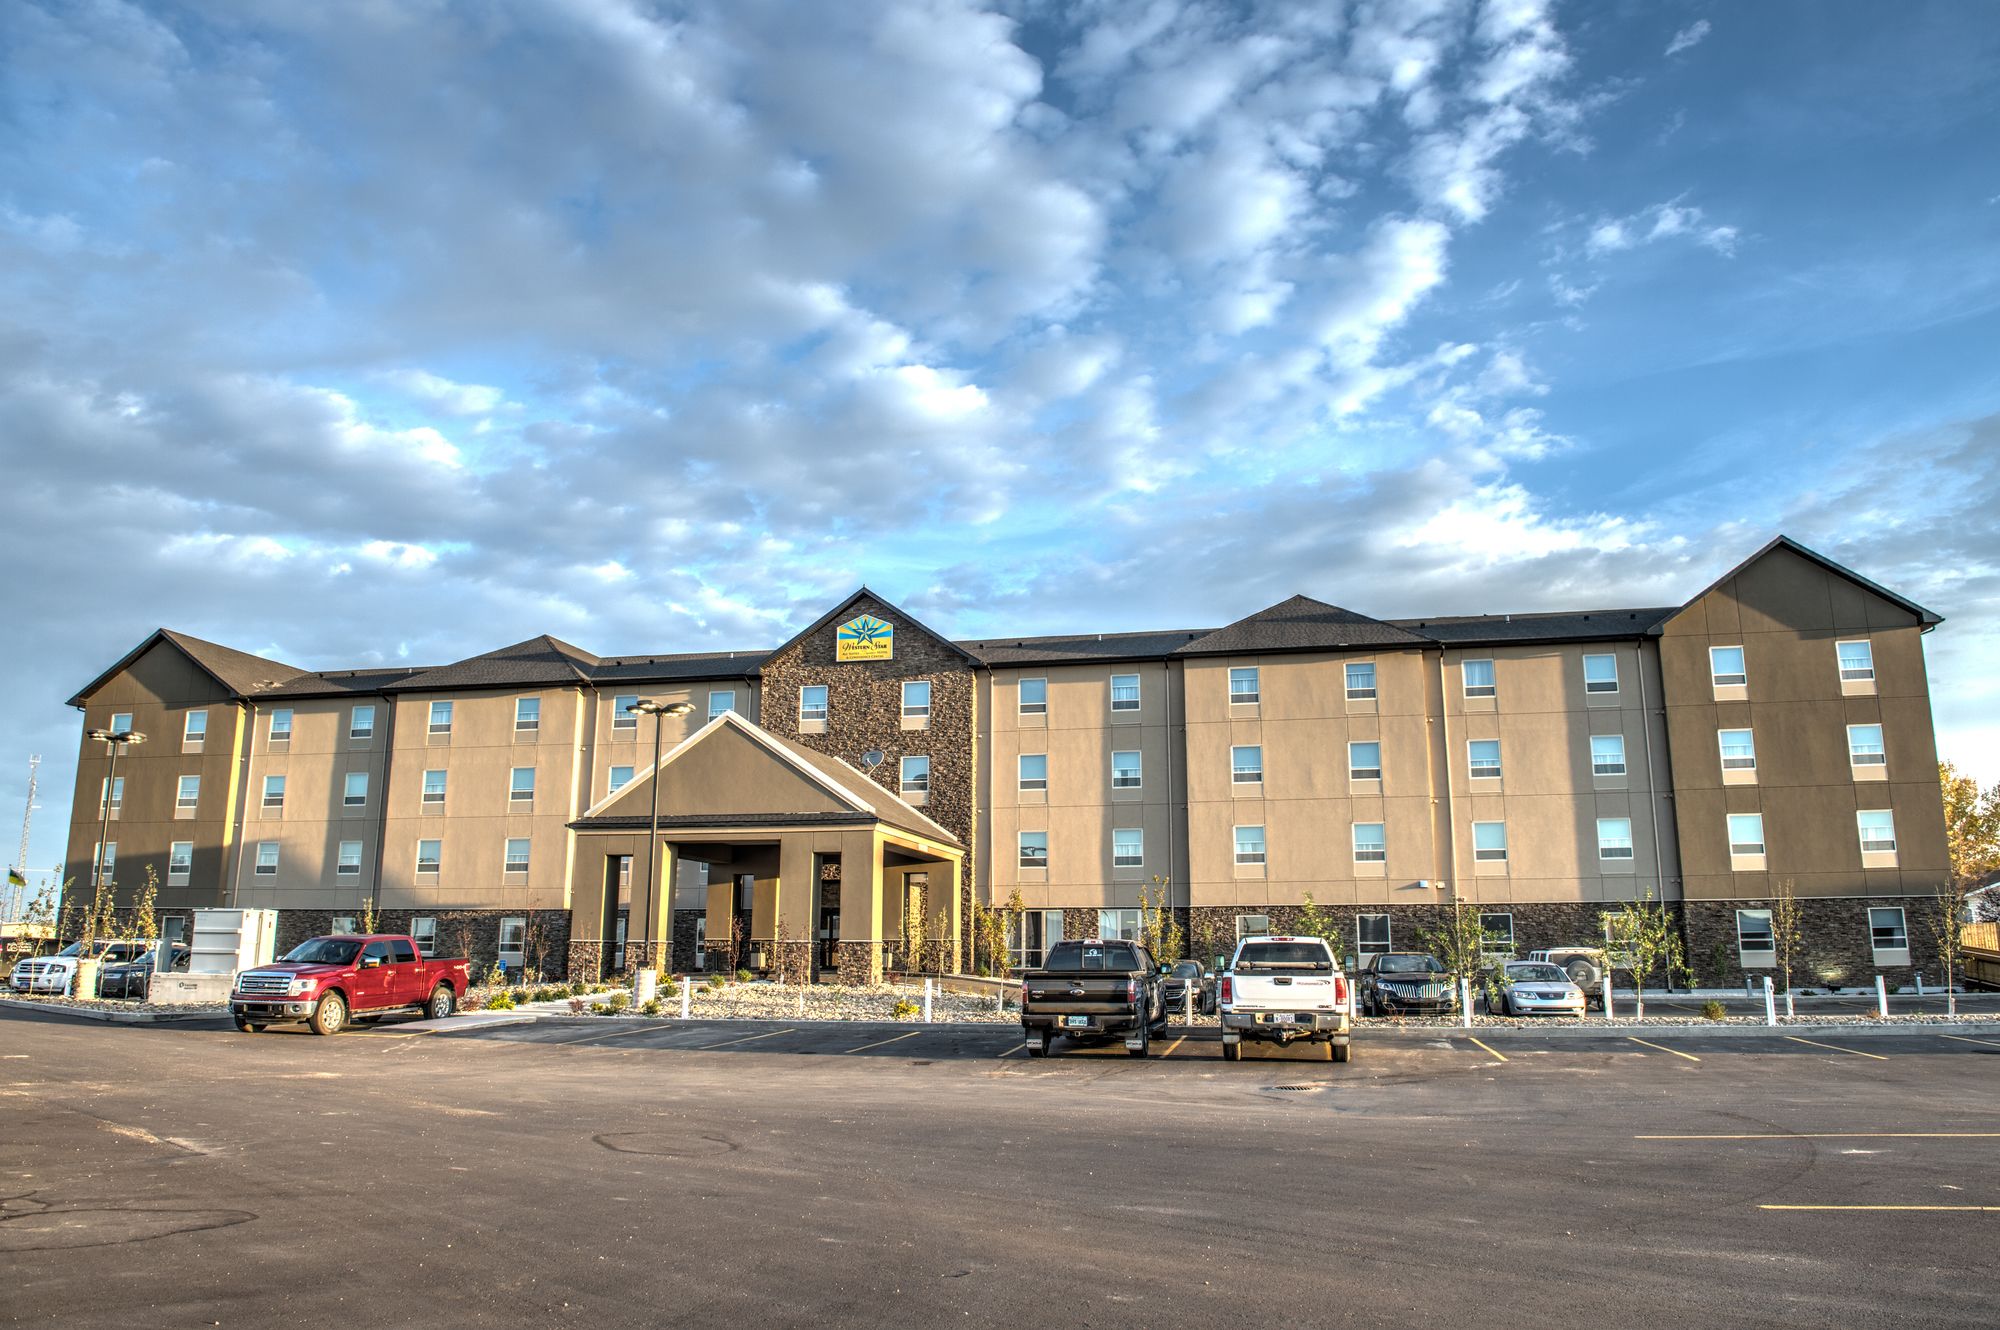 Western Star All Suites Signature Hotel